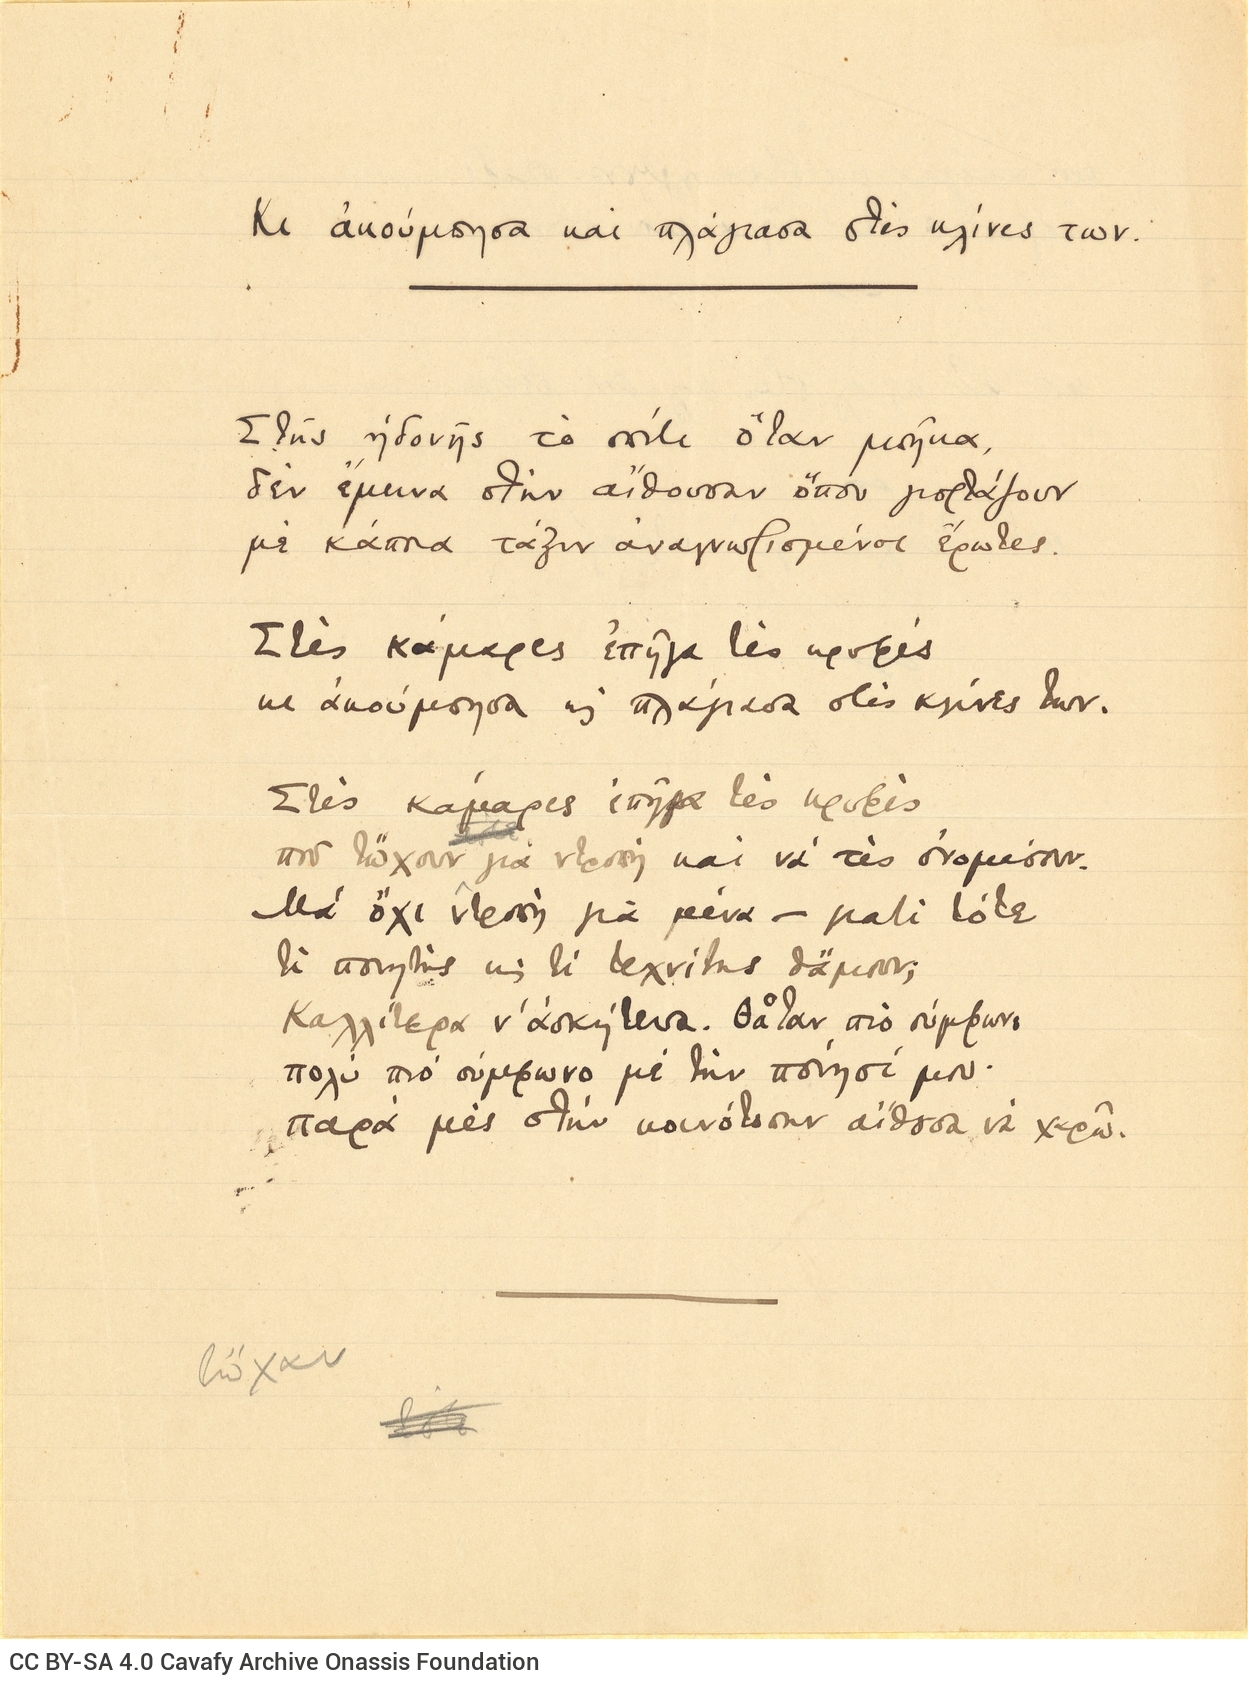 Manuscript of a poem and notes on the first two pages of a double sheet notepaper.